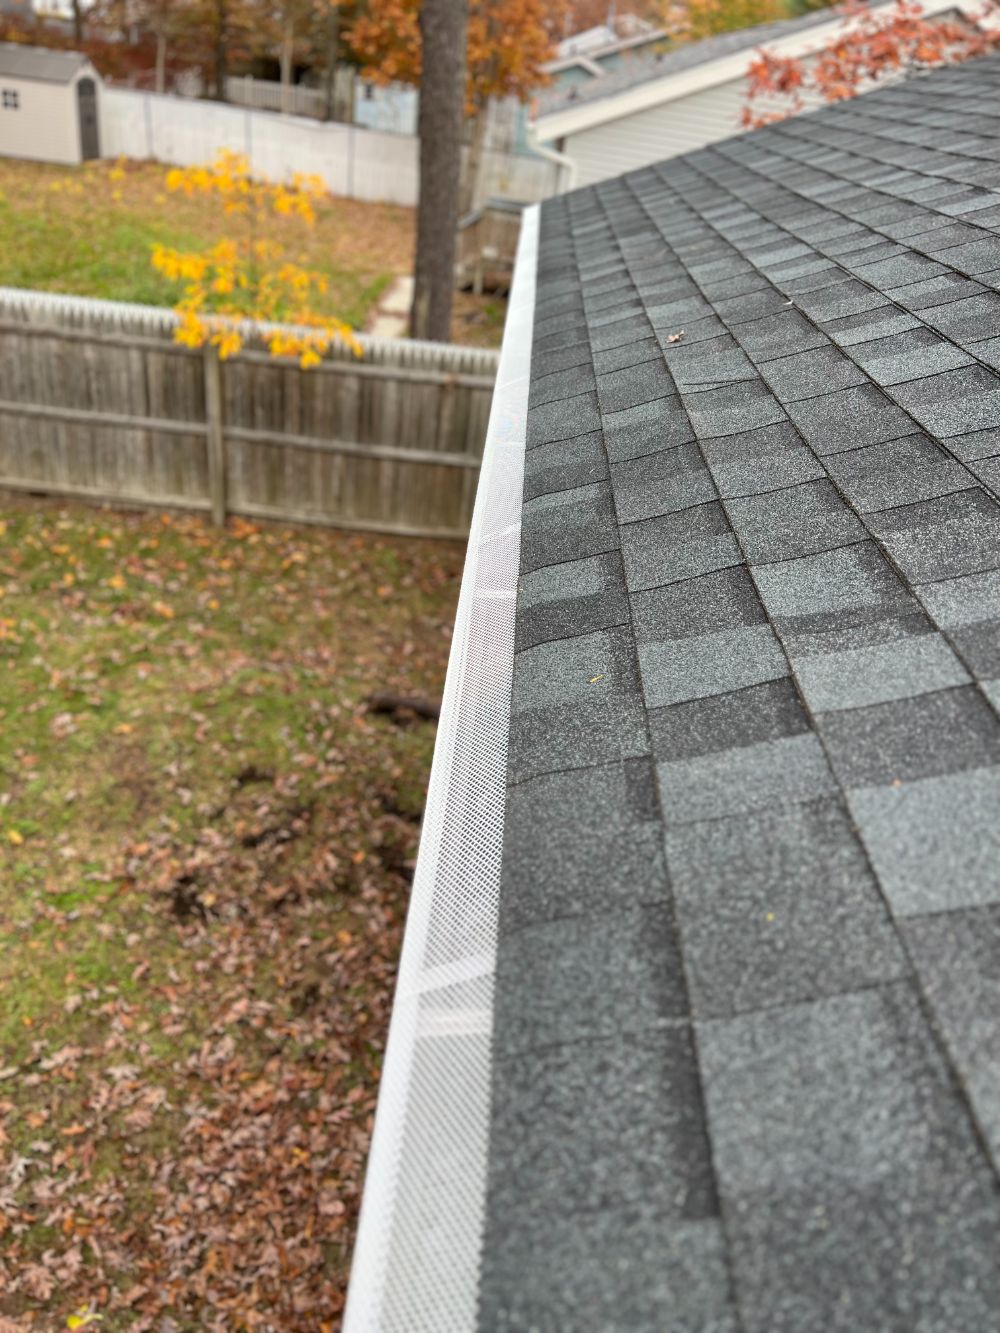 Gutter Cleaning and Leaf Guard Installation in Manahawkin, NJ